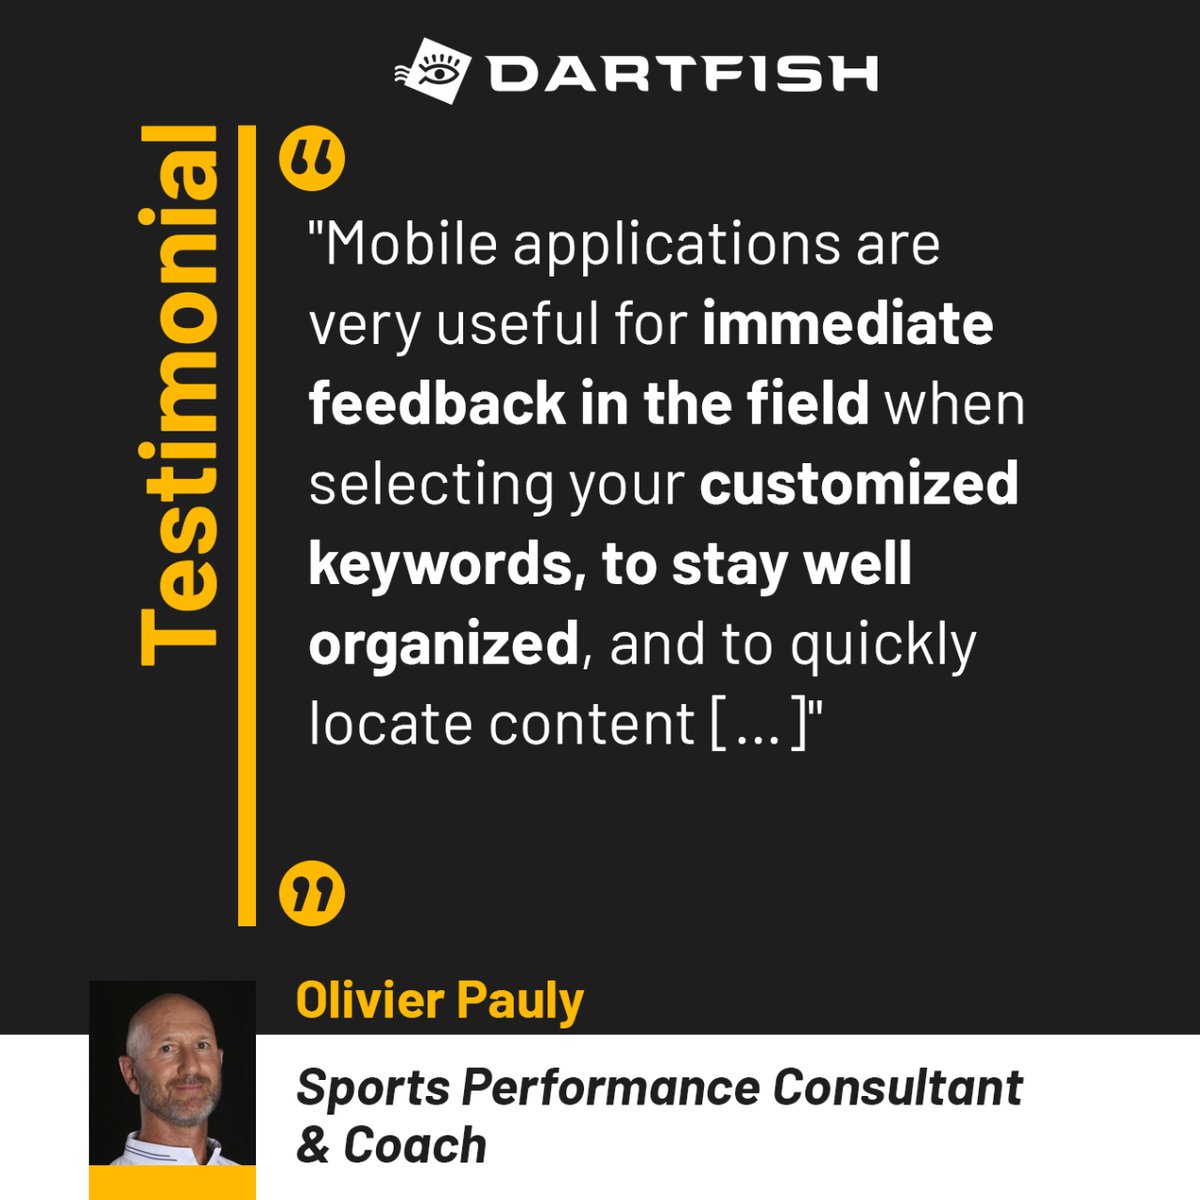 Leveraging his elite athletic experience, Olivier Pauly guides athletes in physical preparation and rehabilitation across diverse sports organizations as a consultant-trainer.

Read his interview: blog.dartfish.com/2021/05/24/int…

#DartfishNation #videoanalysis #coach #sportsscience